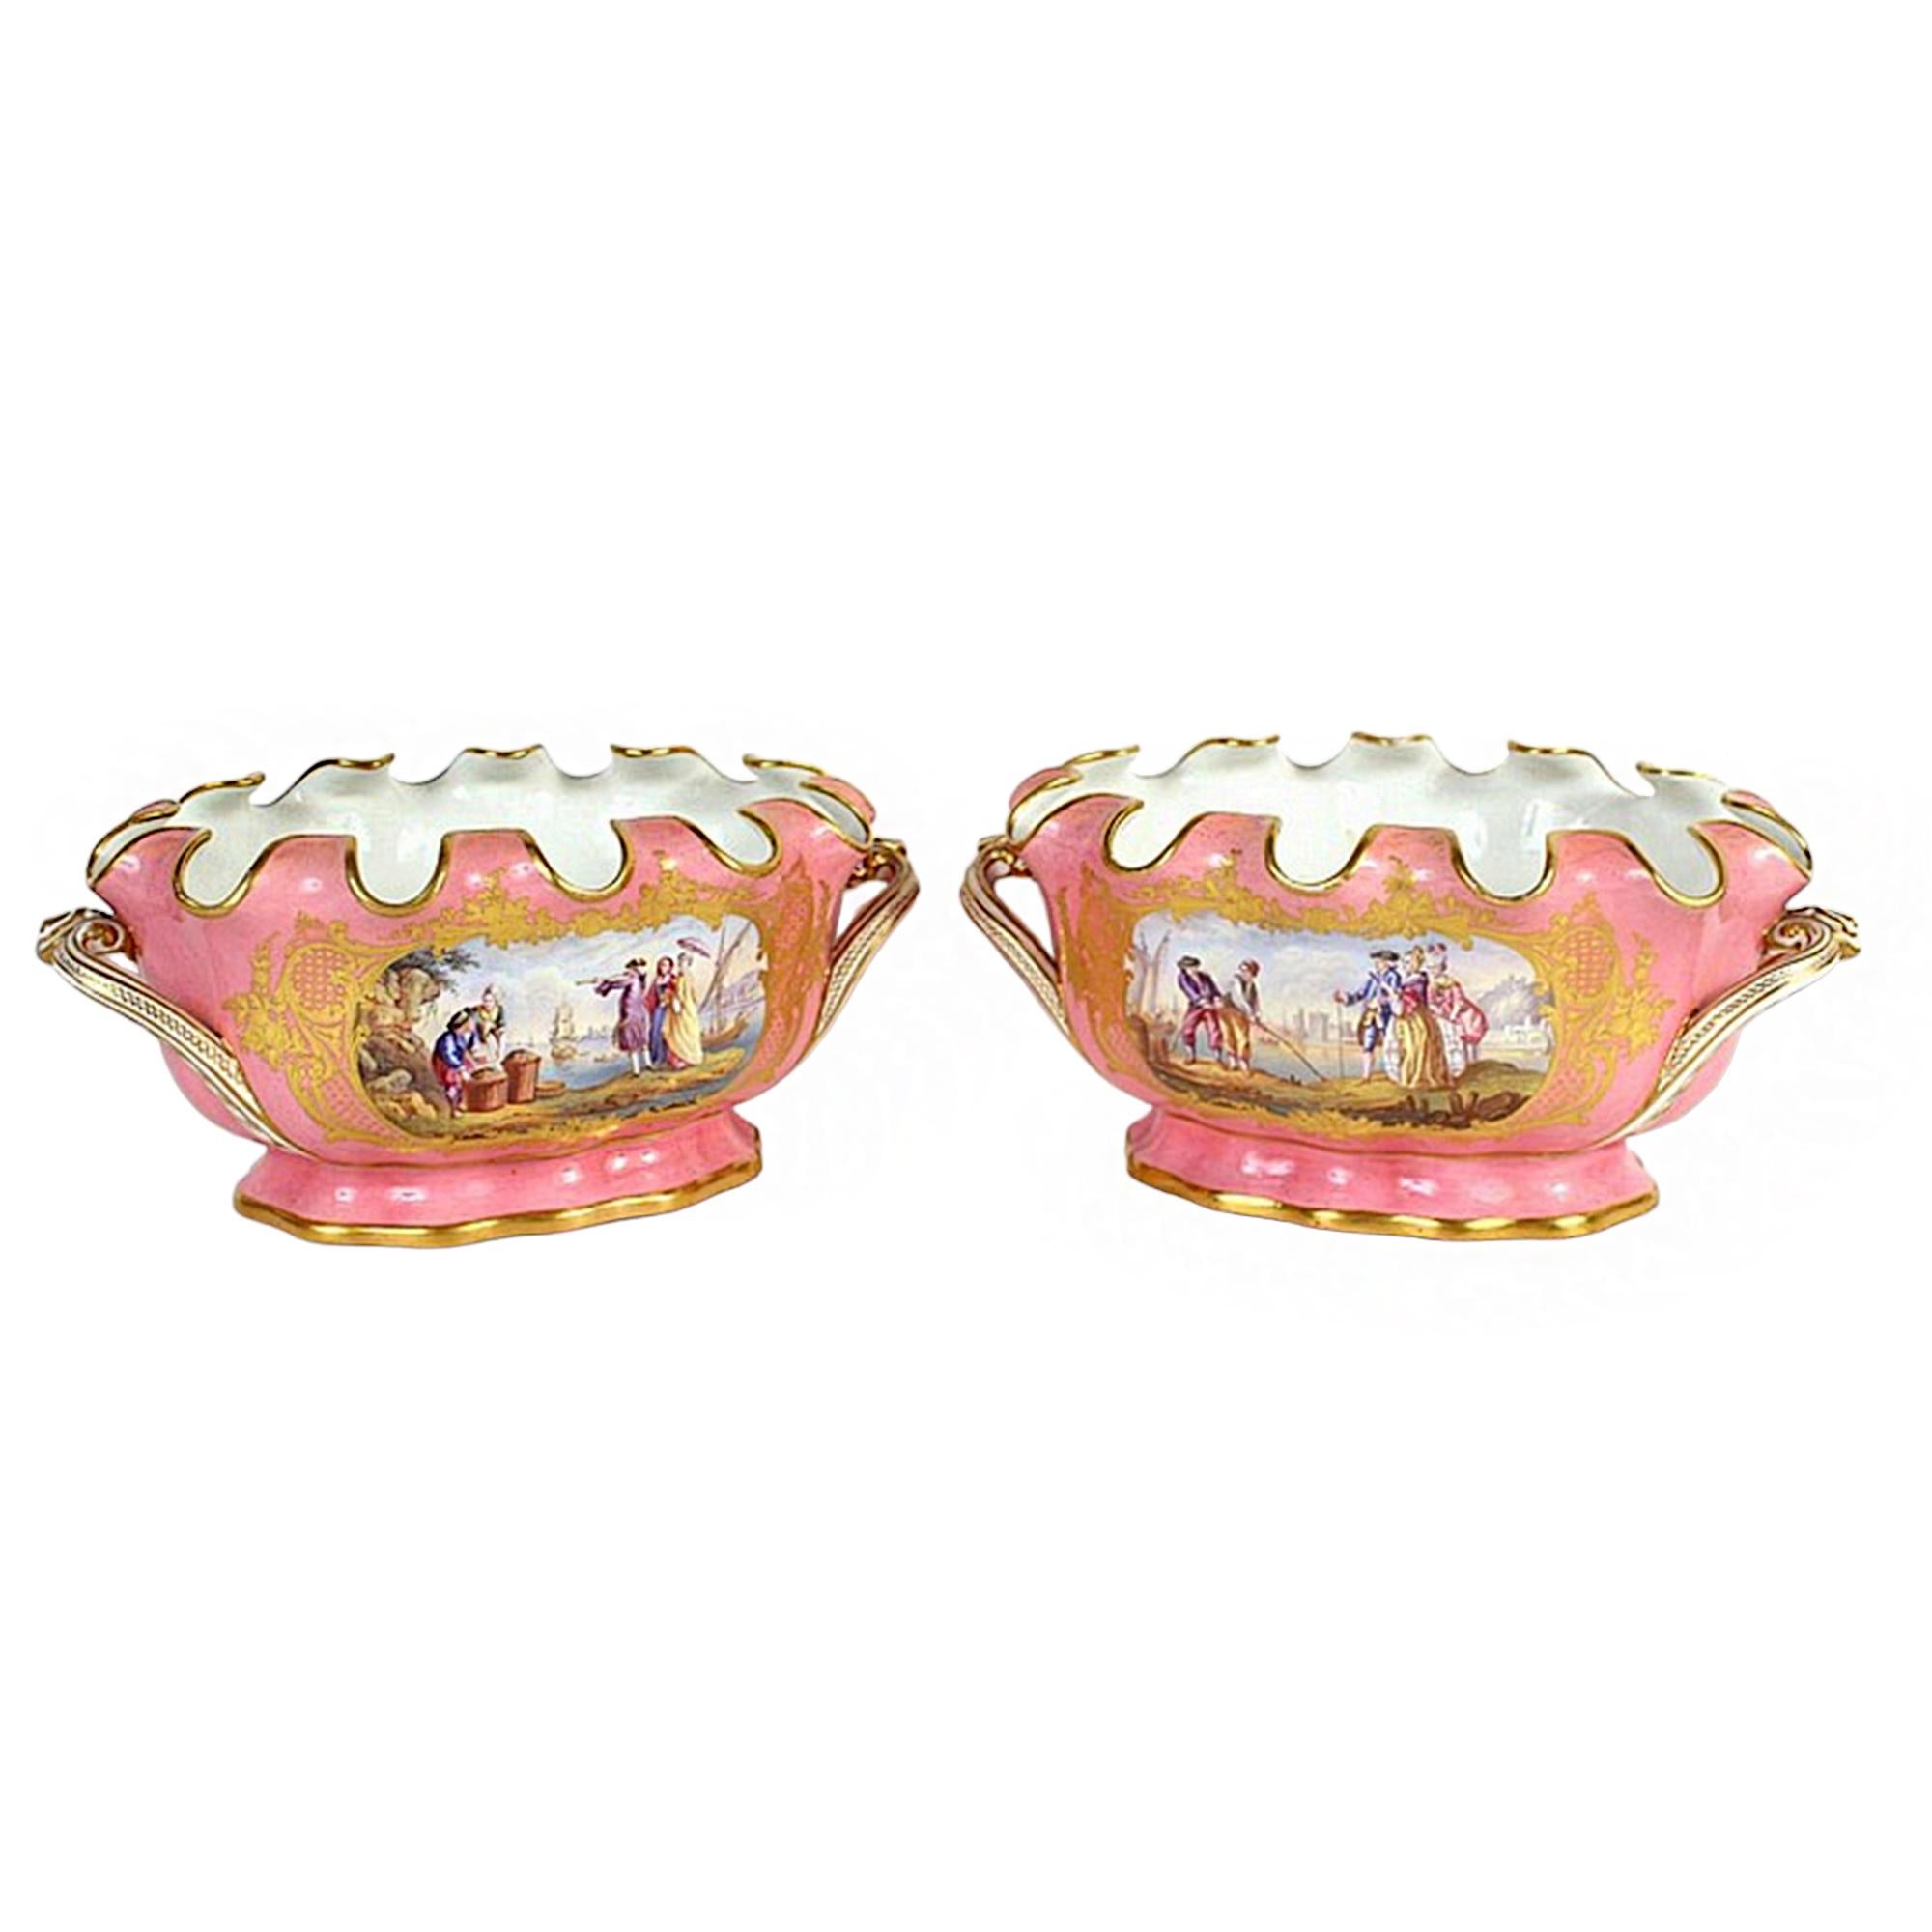 Gorgeous pair of Pink Cache Pots with figural scenes on either side. The scenes depict merchants selling their wares to a nobleman at a market by the water, with large cargo ships floating by. The pots' rippled edges allows for the creation of full